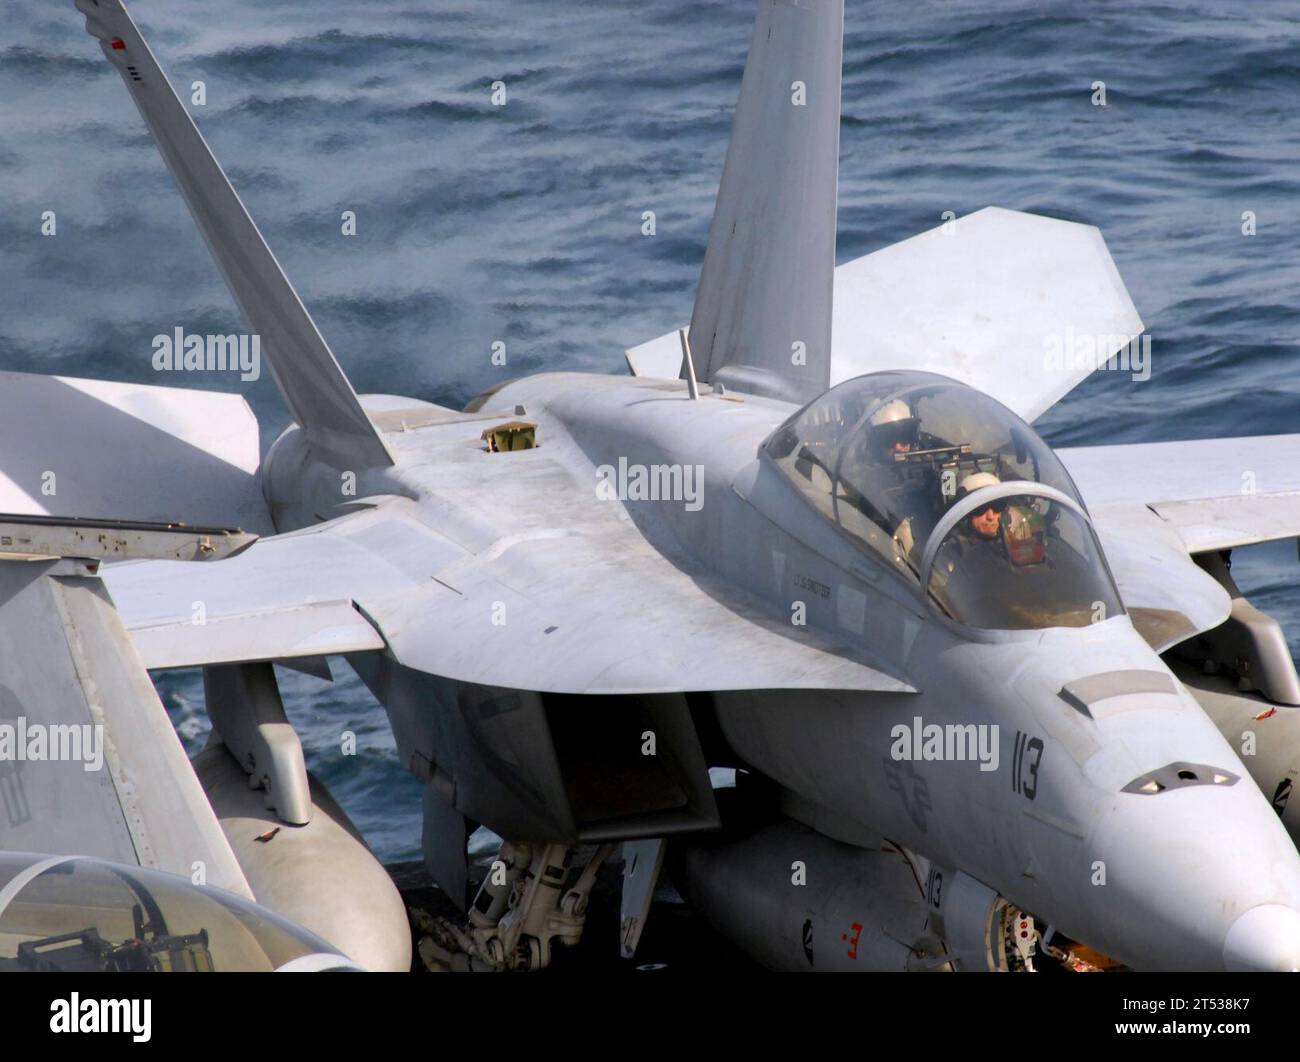 0703133038W-238 ARABIAN SEA (March 13, 2007) - Pilots assigned to the 'Black Knights' of Strike Fighter Squadron (VFA) 154 test their F/A-18F Super Hornet's ailerons prior to launch aboard Nimitz-class aircraft carrier USS John C. Stennis (CVN 74). Stennis Carrier Strike Group is on a scheduled deployment in support of Maritime Security Operations (MSO). U.S. Navy Stock Photo